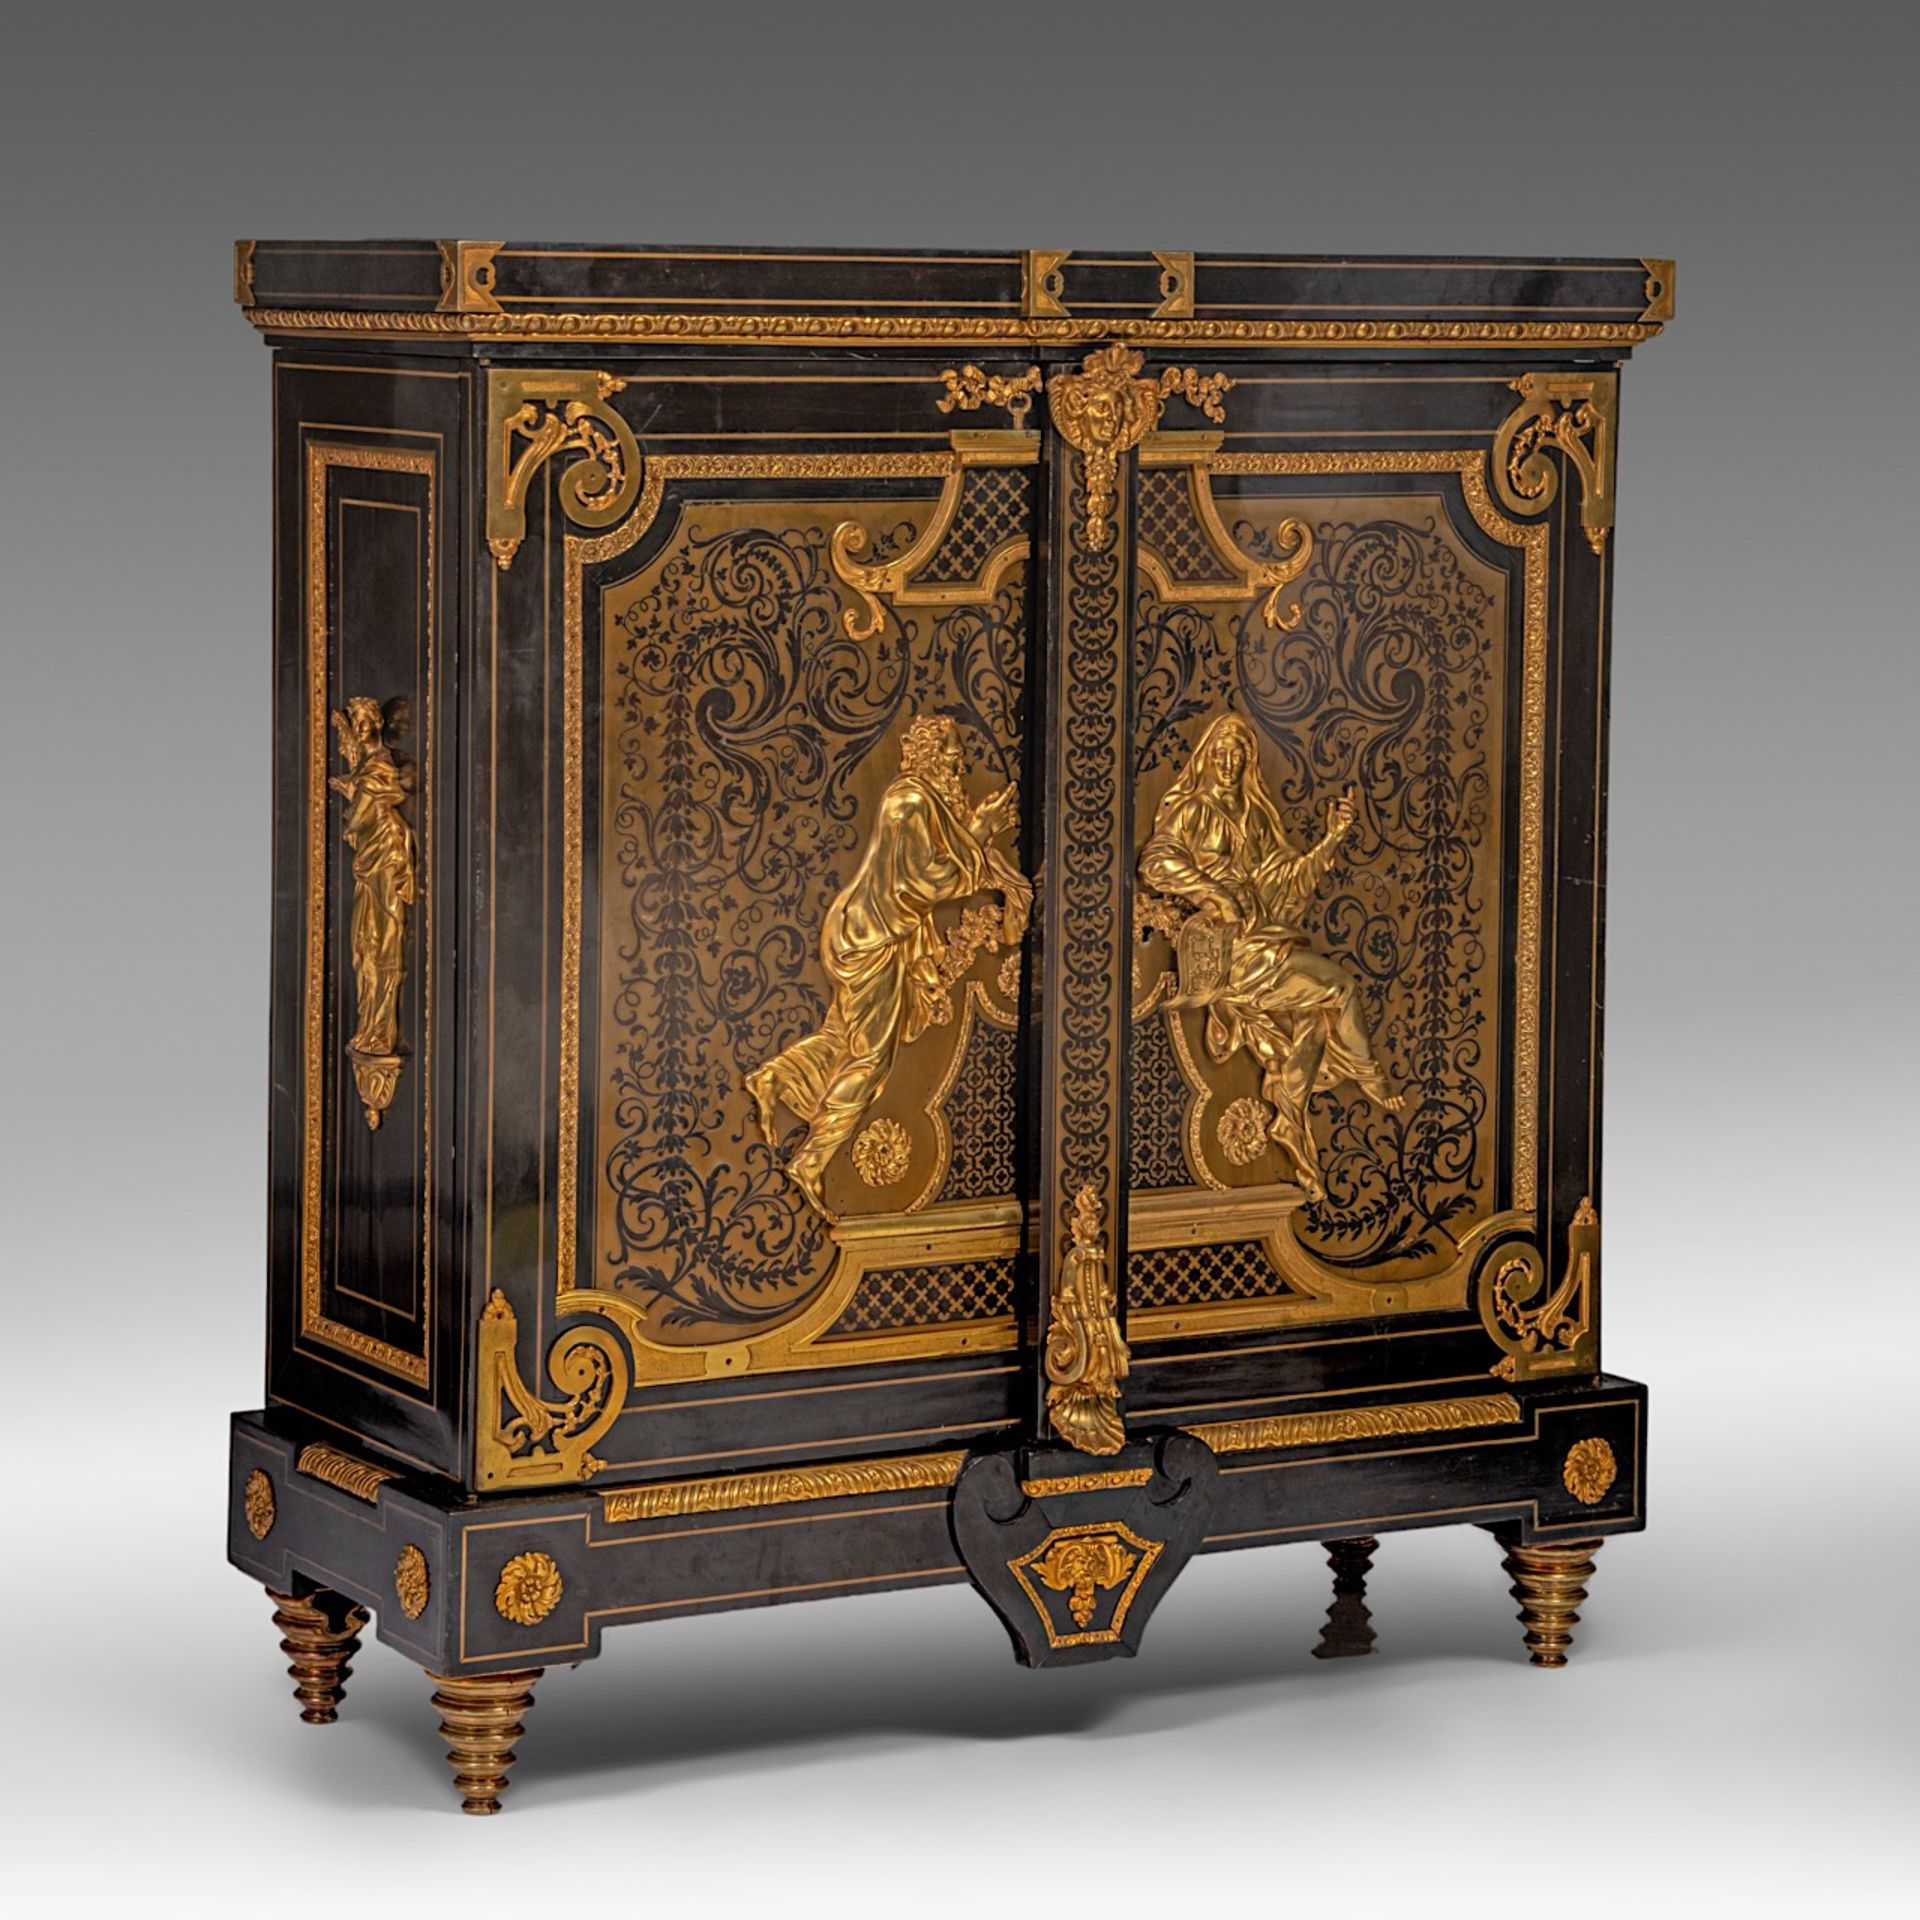 An exceptional Regence style Boulle work cabinet with gilt bronze mounts, signed Mathieu Befort The